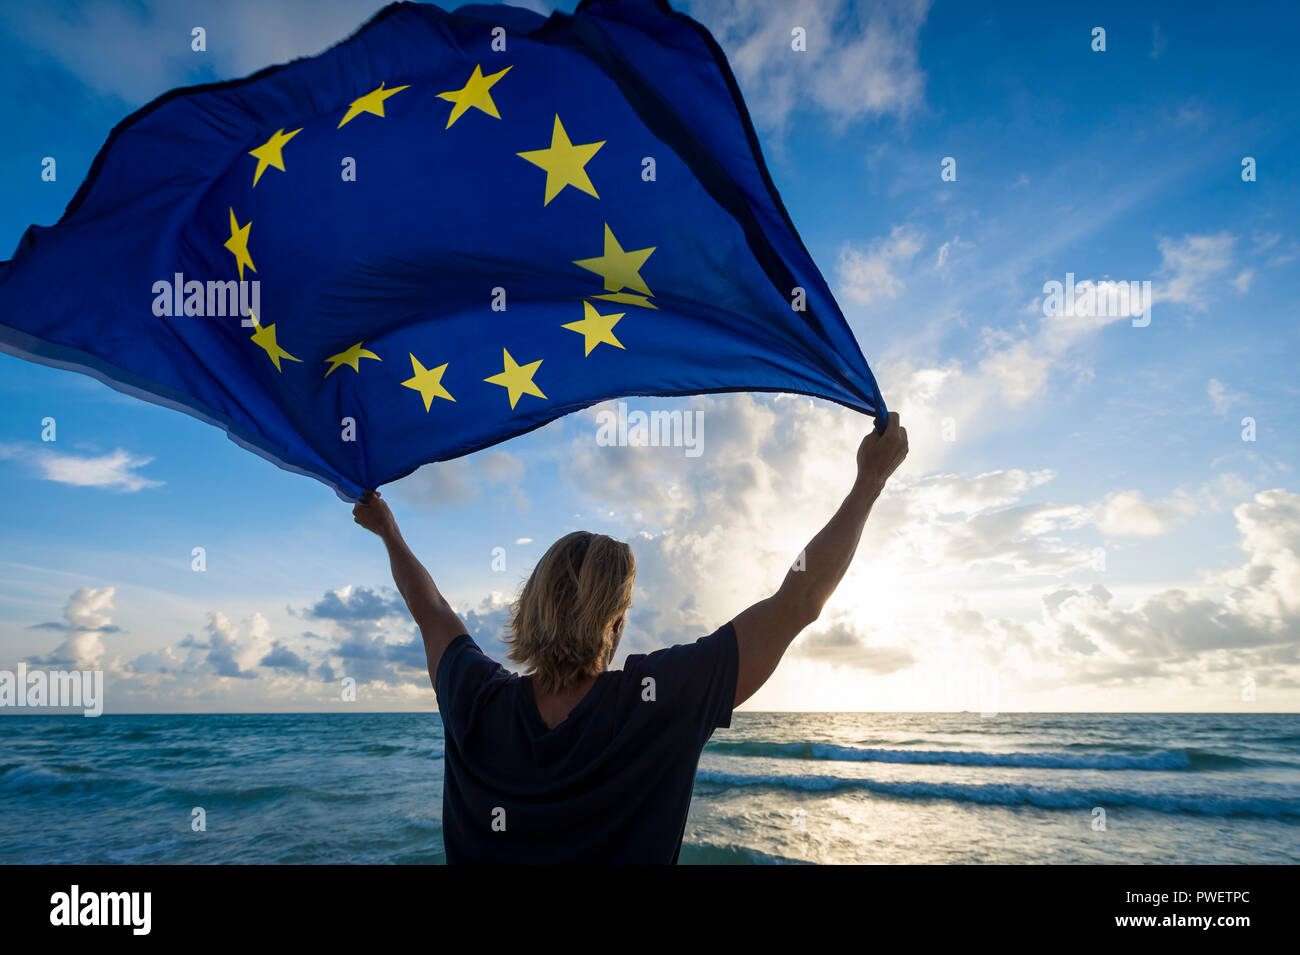 Silhouette of person holding European Union flag against soft sunset sky Stock Photo